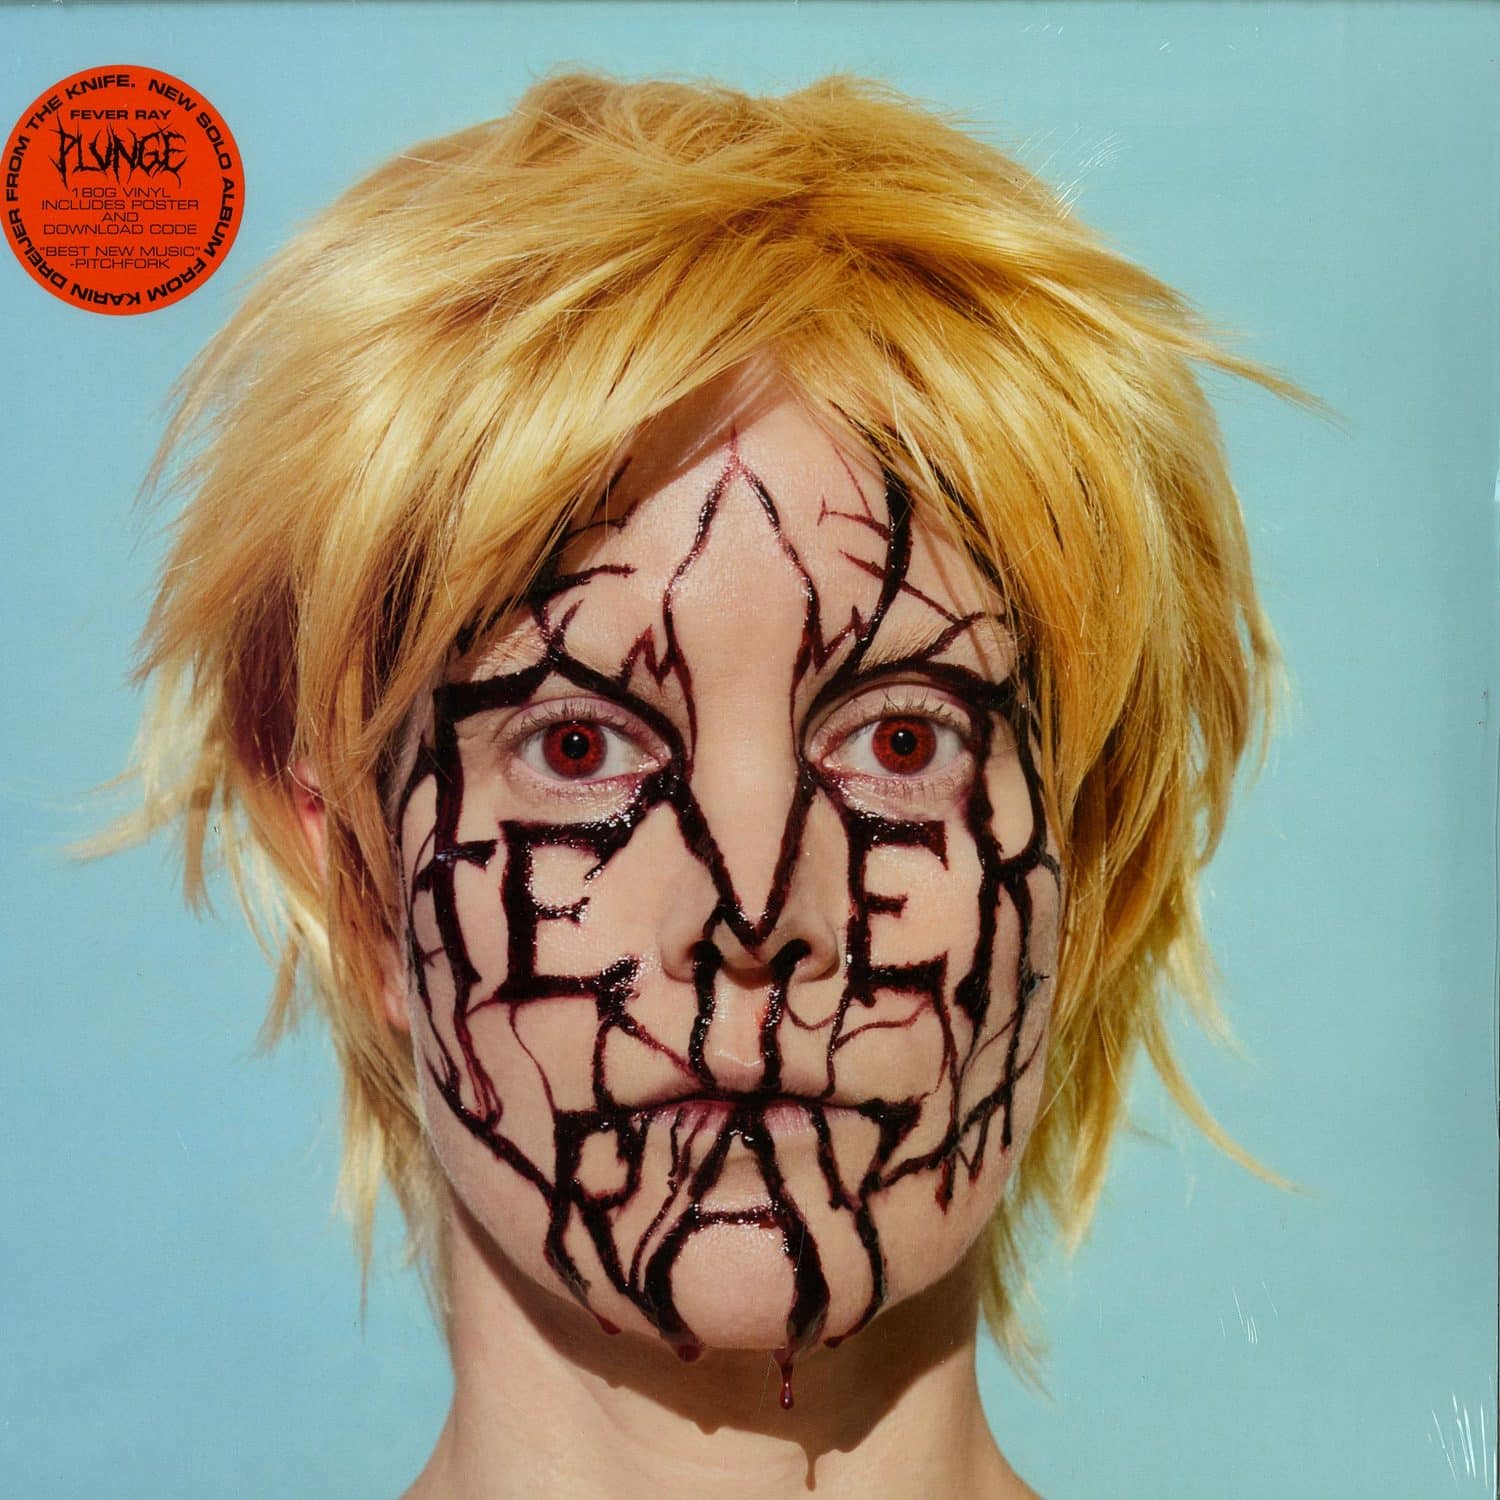 Fever Ray - PLUNGE 